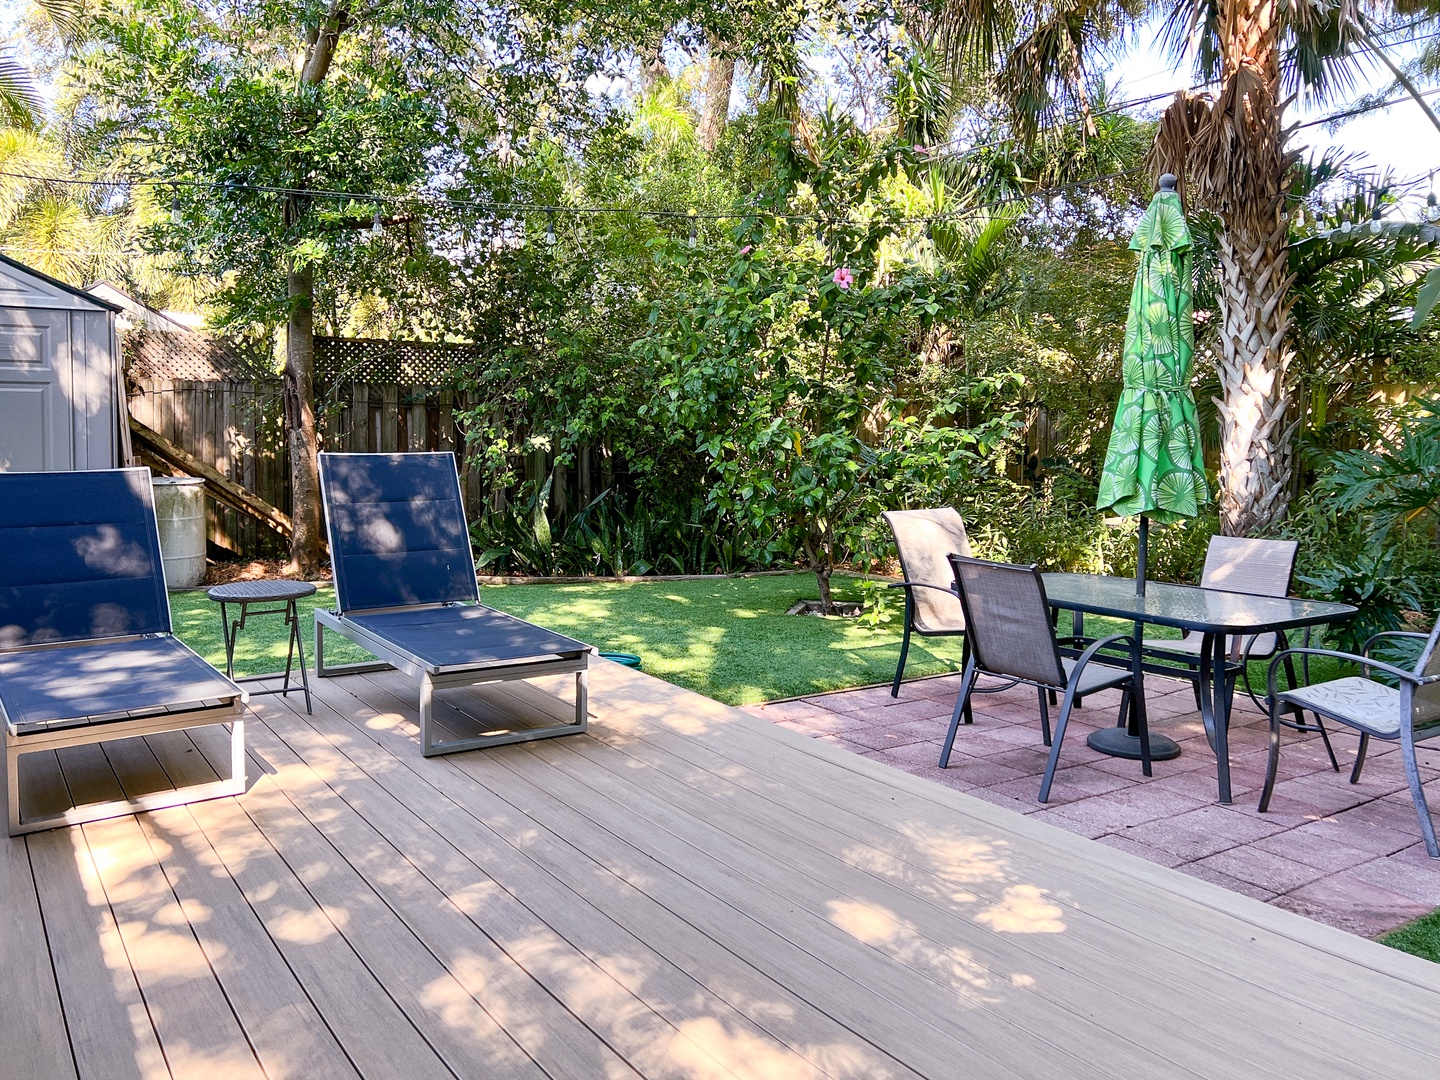 Deck and synthetic turf in the backyard